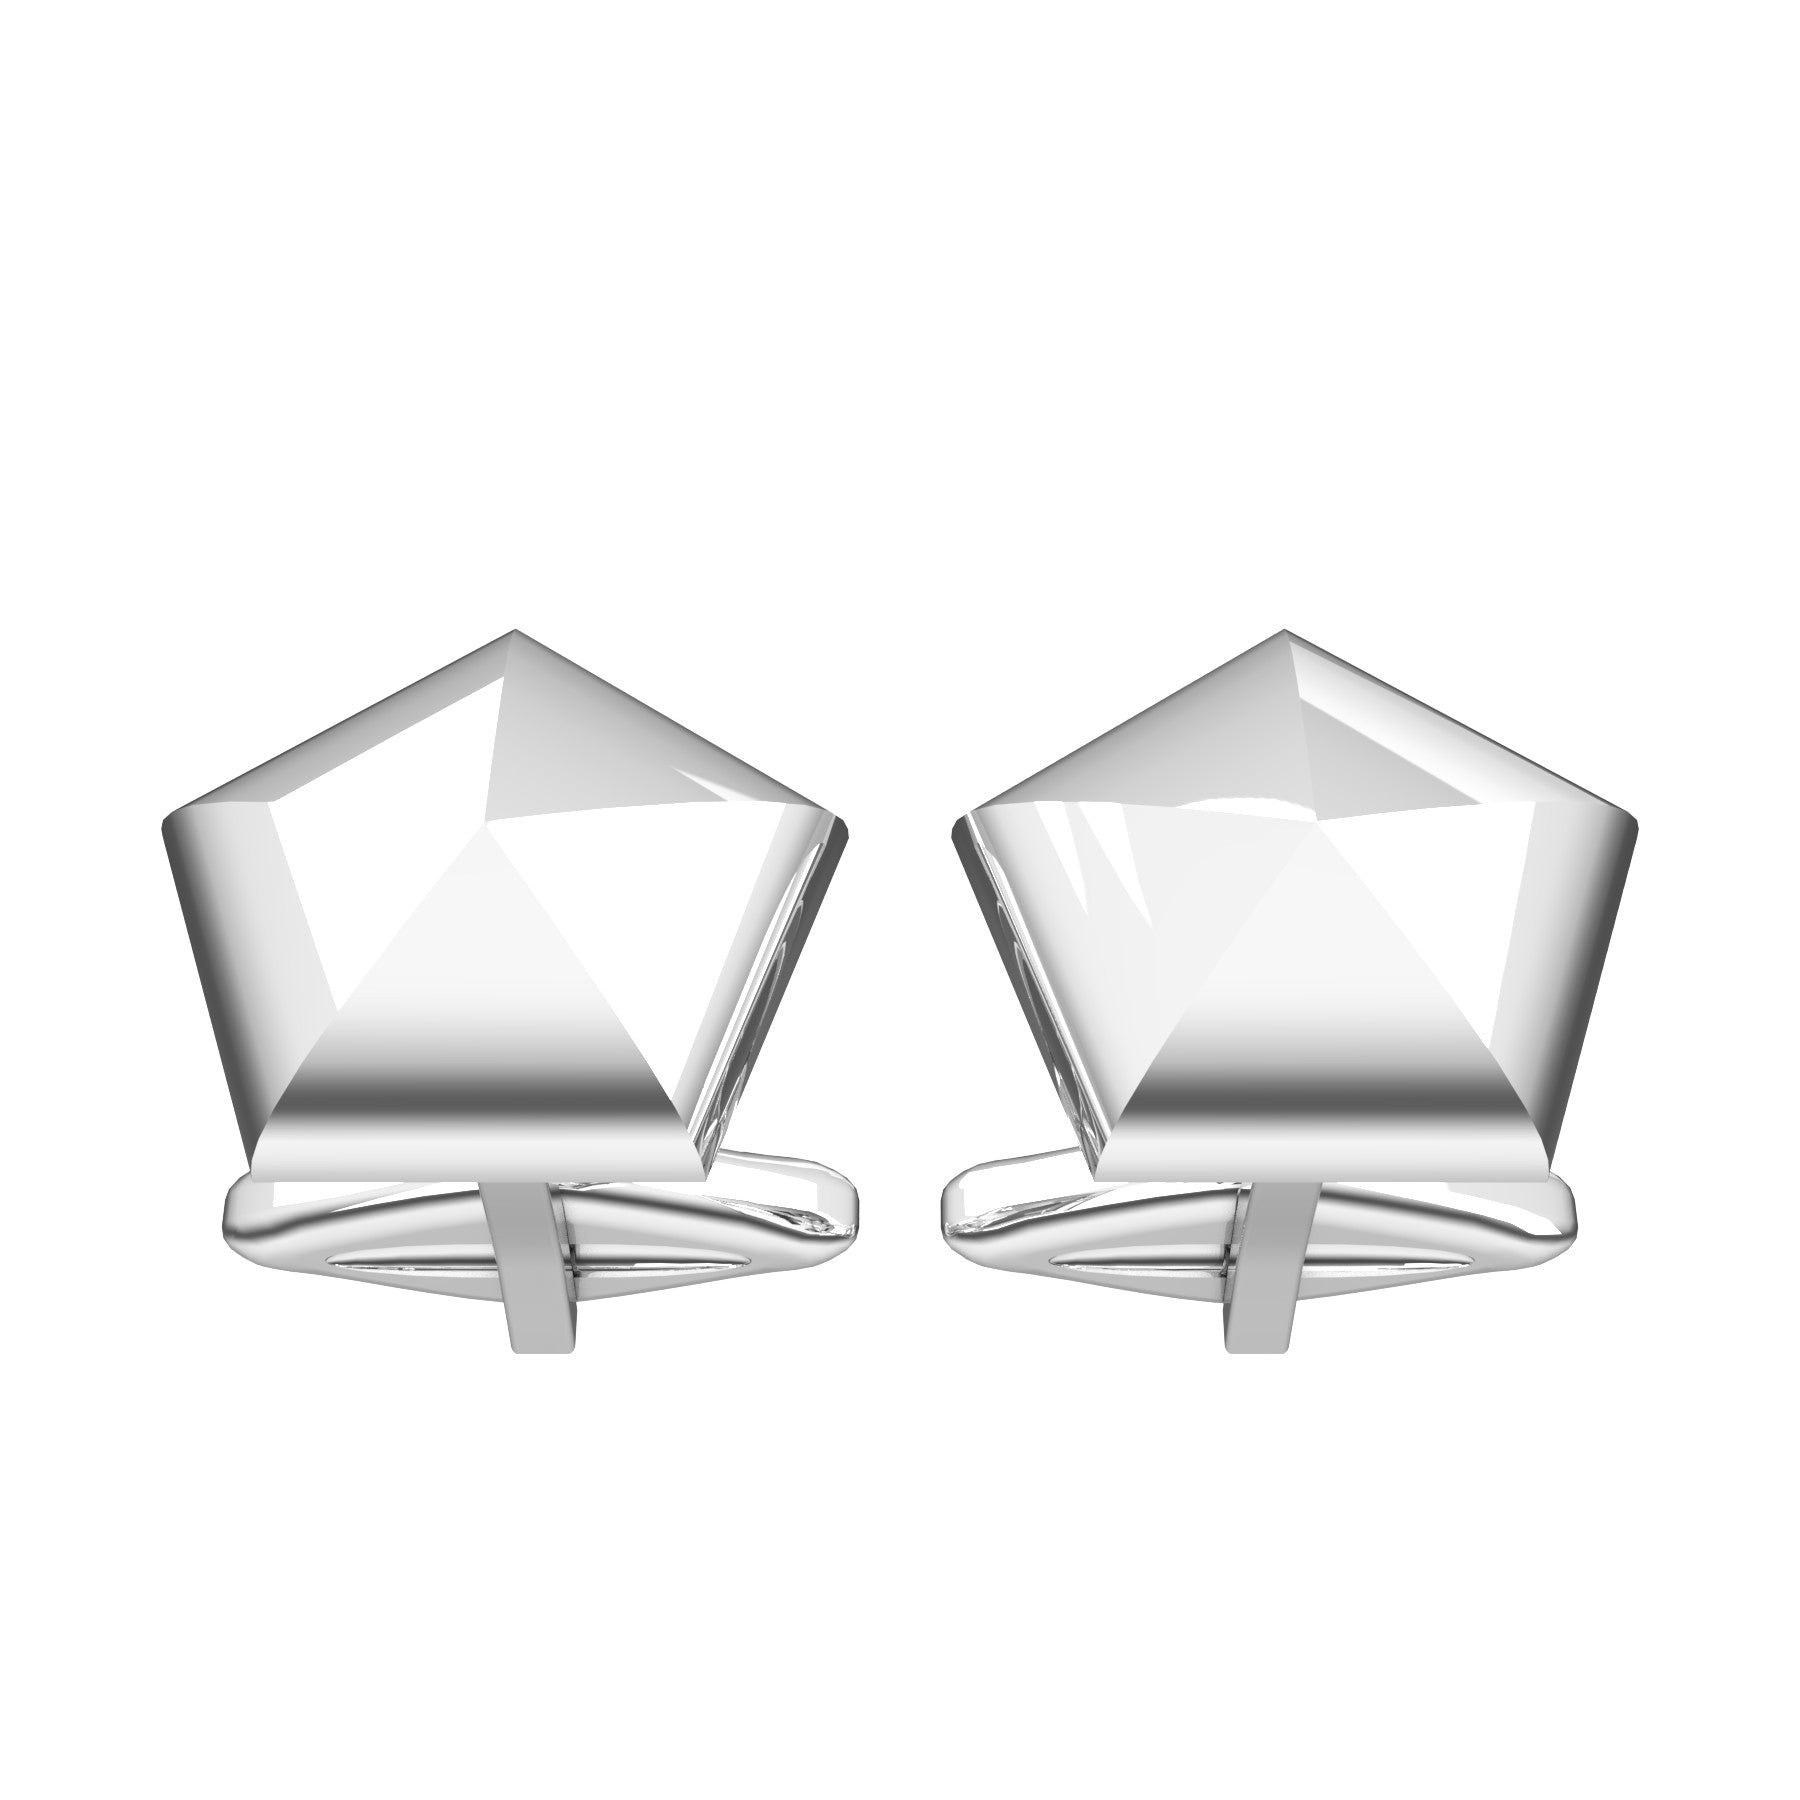 domed pentagonal cufflinks, sterling silver, weight about 7,00 g. (0,25 oz), size 16,1x15,3x4 mm